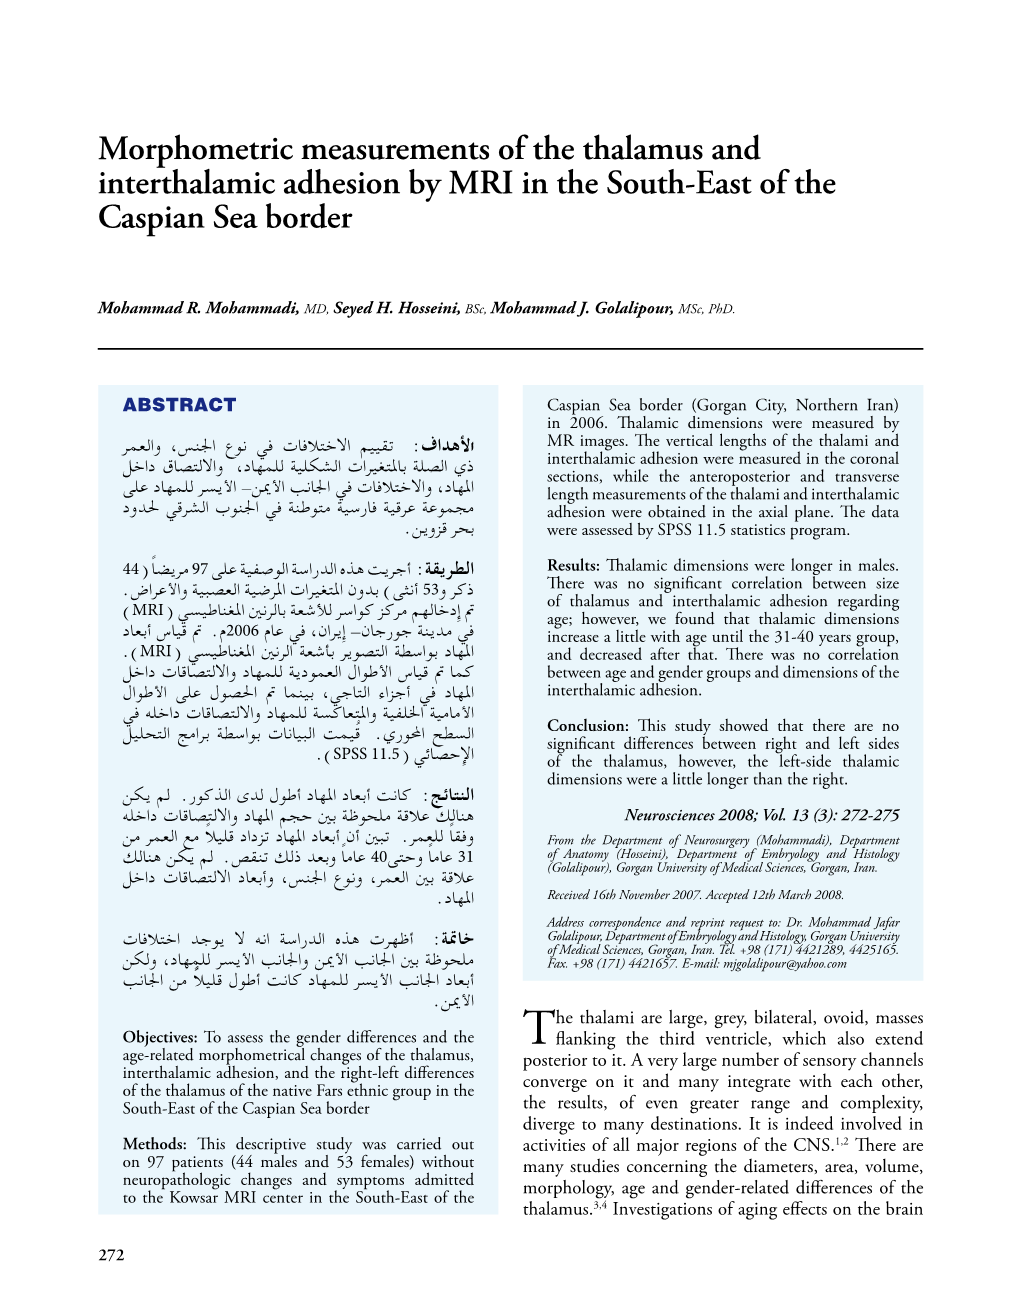 Morphometric Measurements of the Thalamus and Interthalamic Adhesion by MRI in the South-East of the Caspian Sea Border